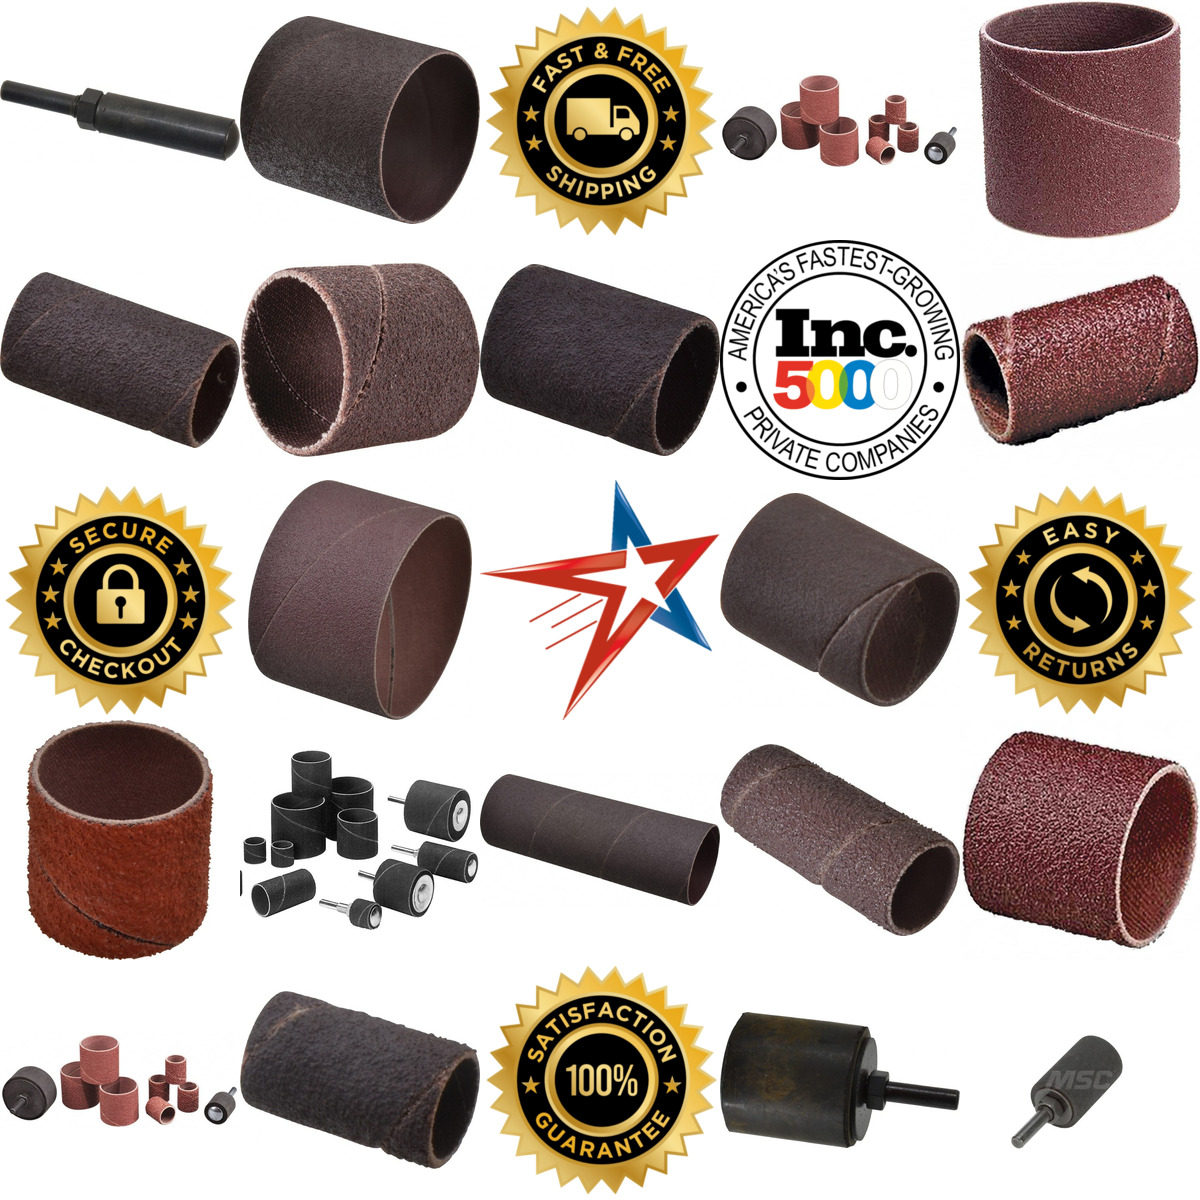 A selection of Spiral Bands and Drums products on GoVets